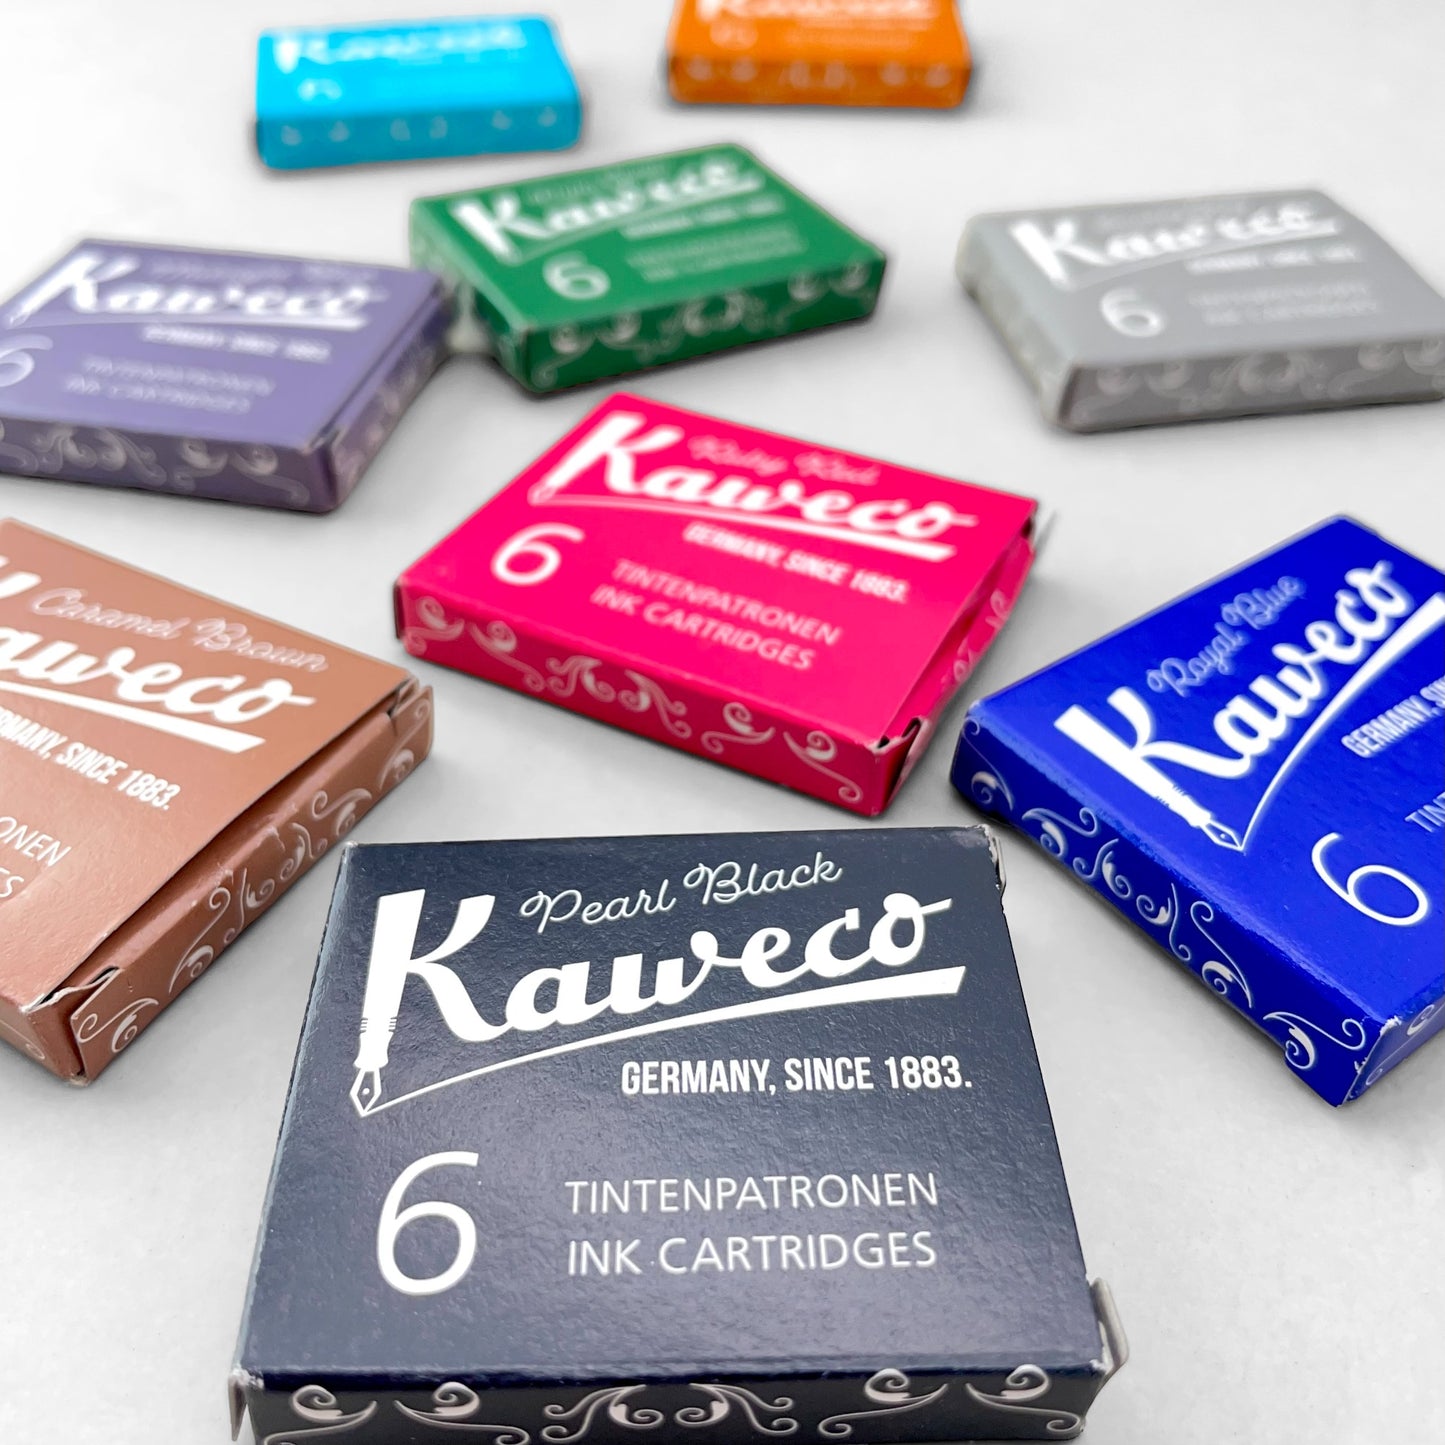 Box of 6 ink cartridges by Kaweco in smokey grey colour